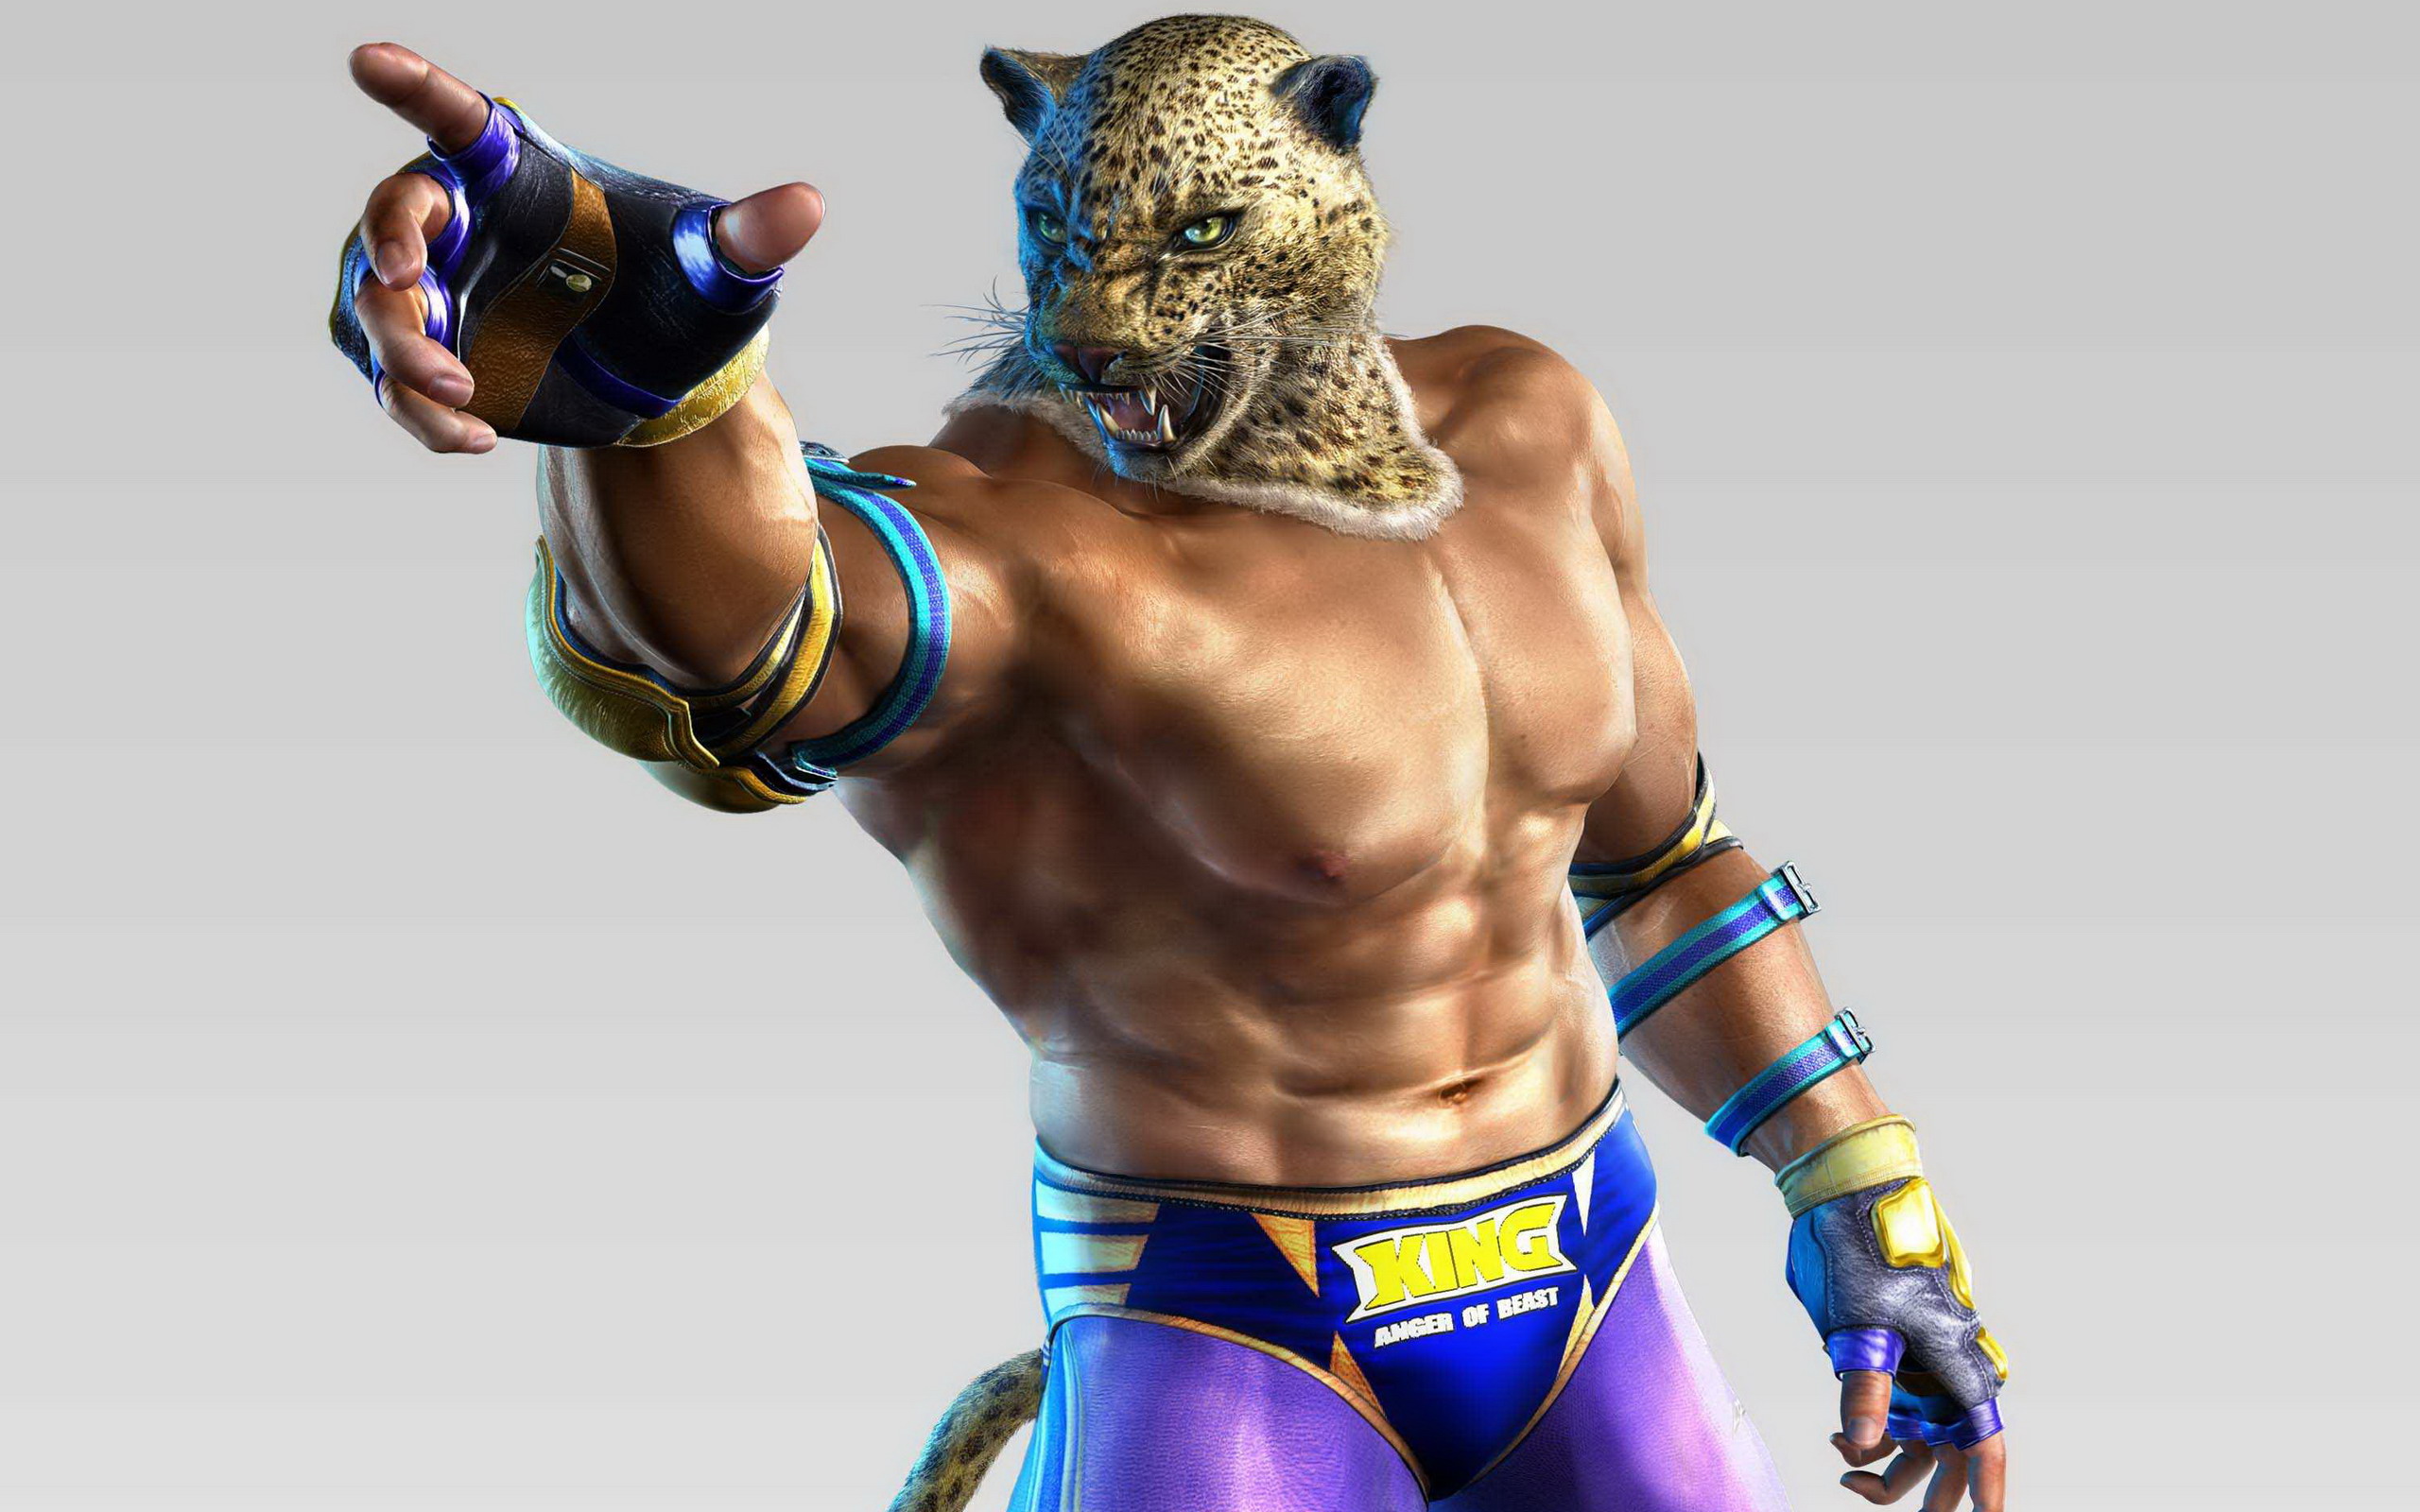 And Tekken Games HD Wallpaper Image For Your